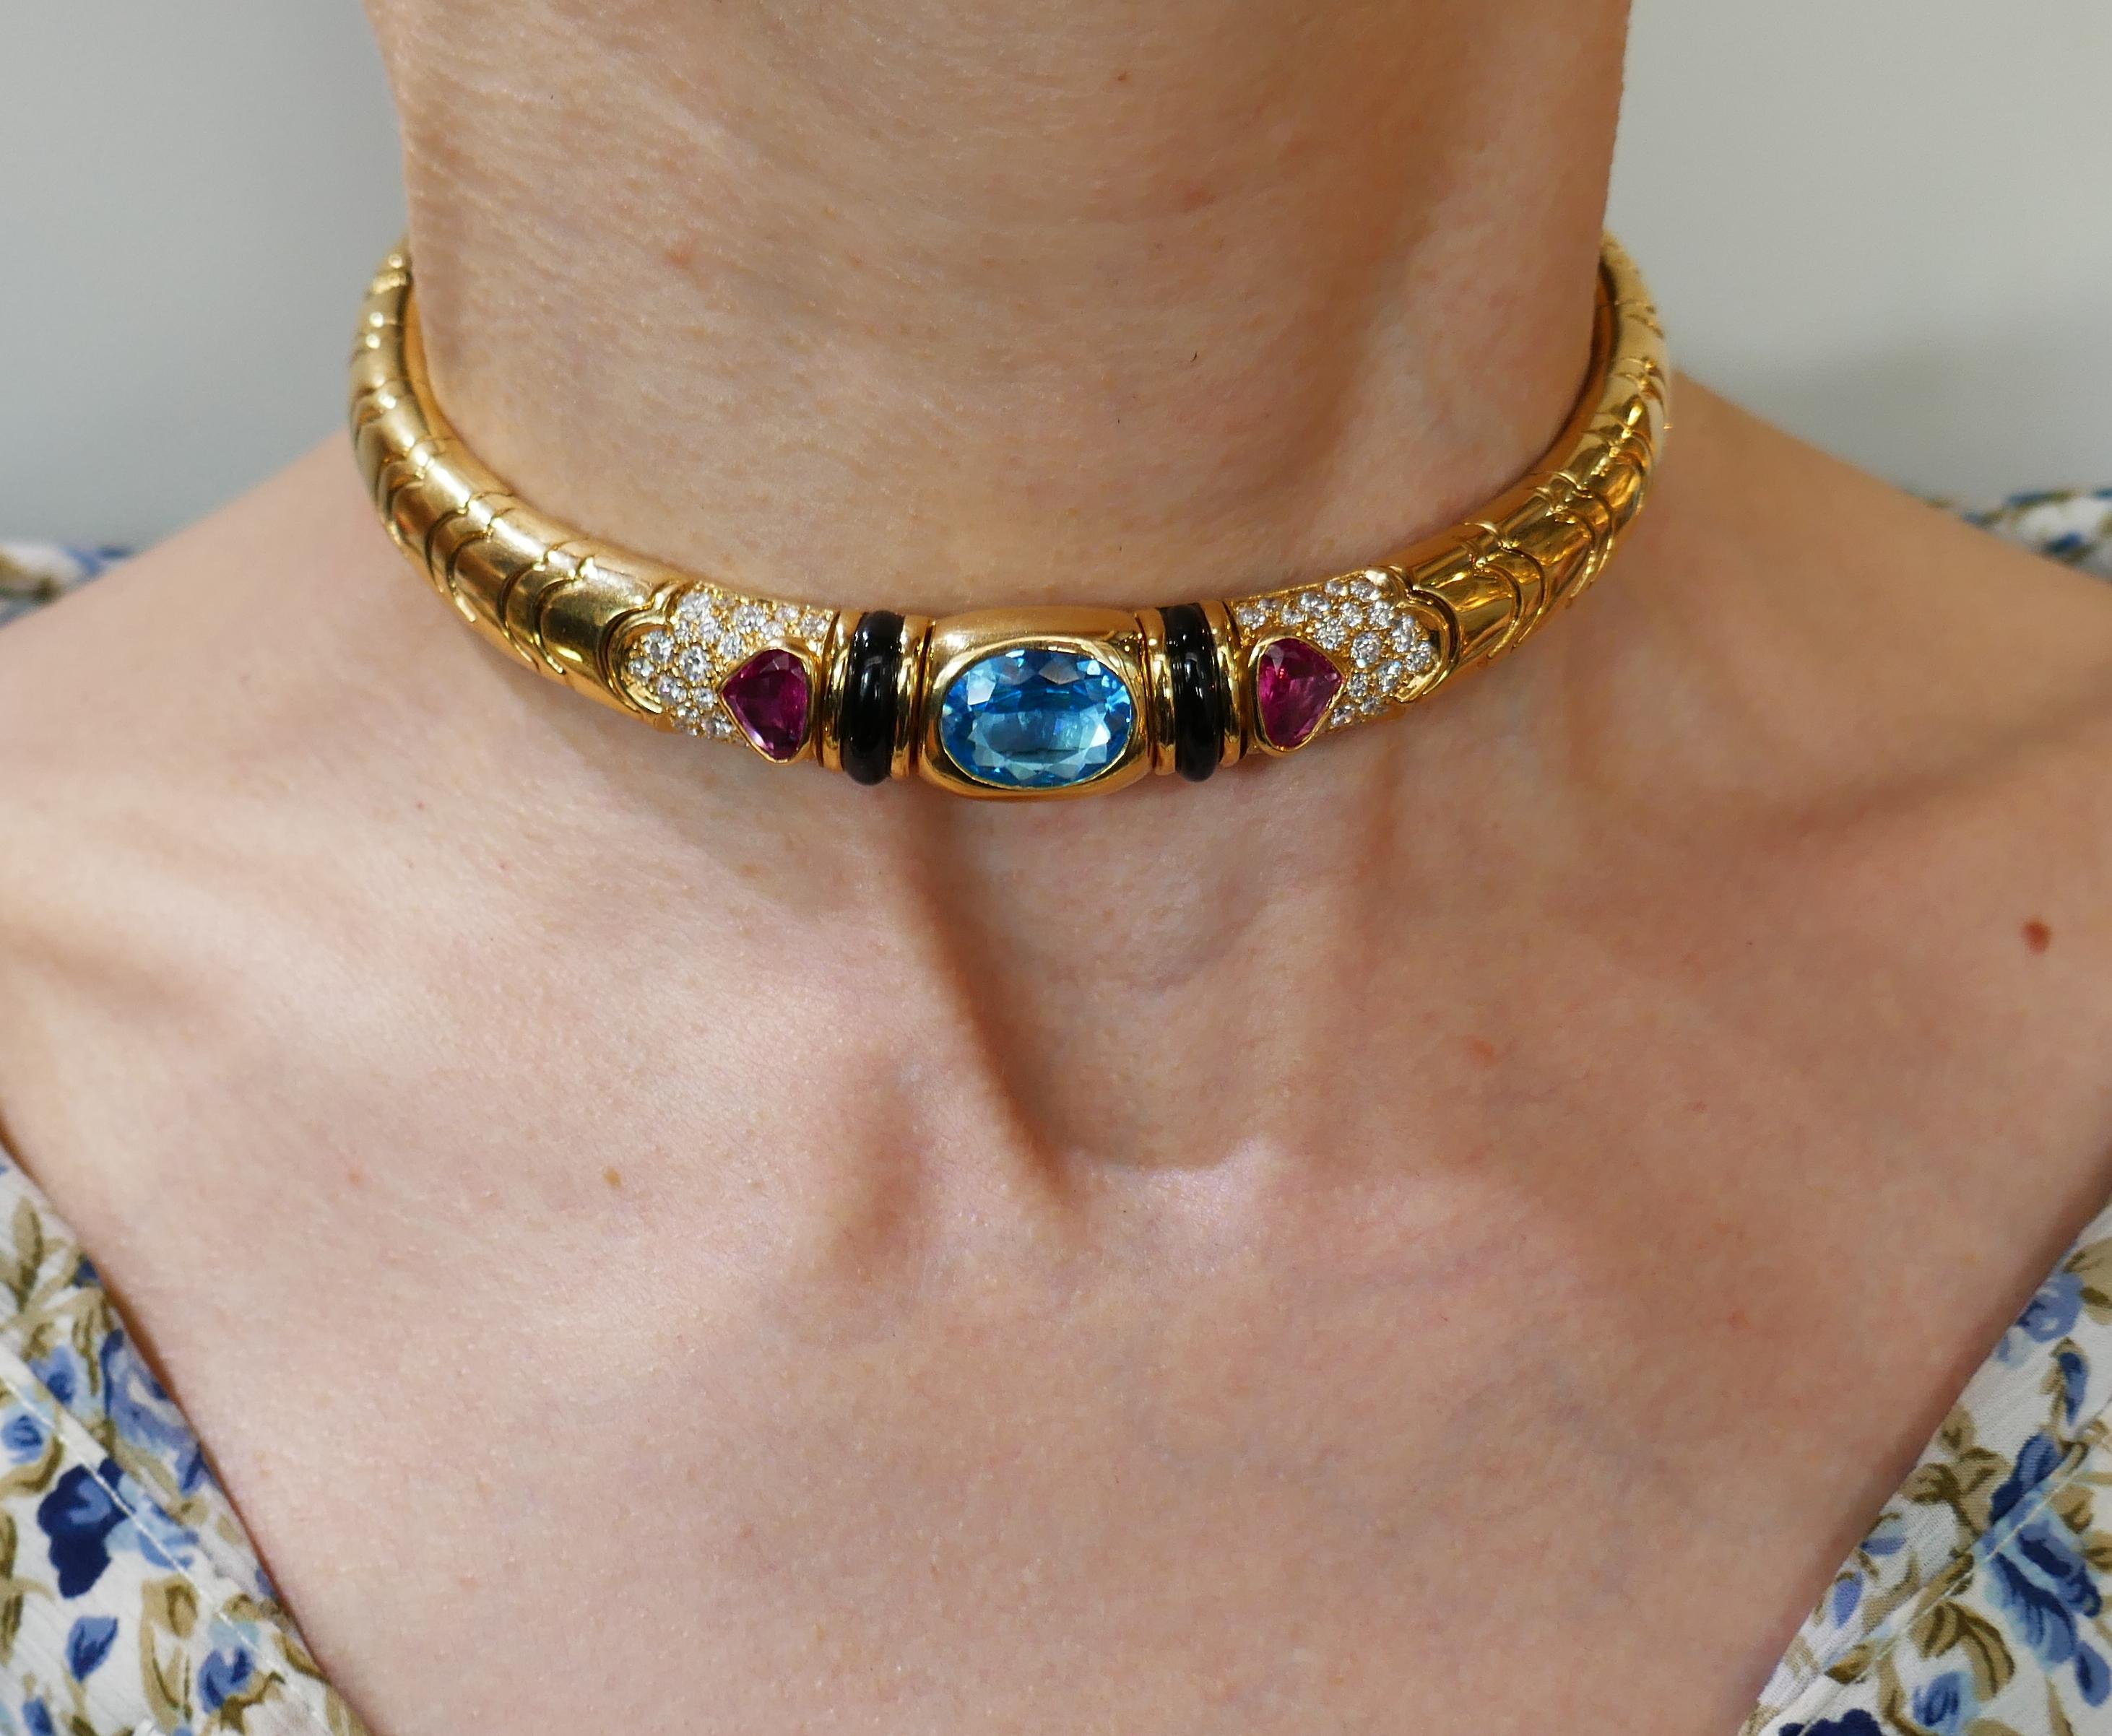 Colorful and chic choker necklace created by Marina B in 1980s. It definitely makes a statement! Elegant and wearable, the choker is a great addition to your jewelry collection. Features a faceted oval-shape blue topaz set in 18 karat yellow gold